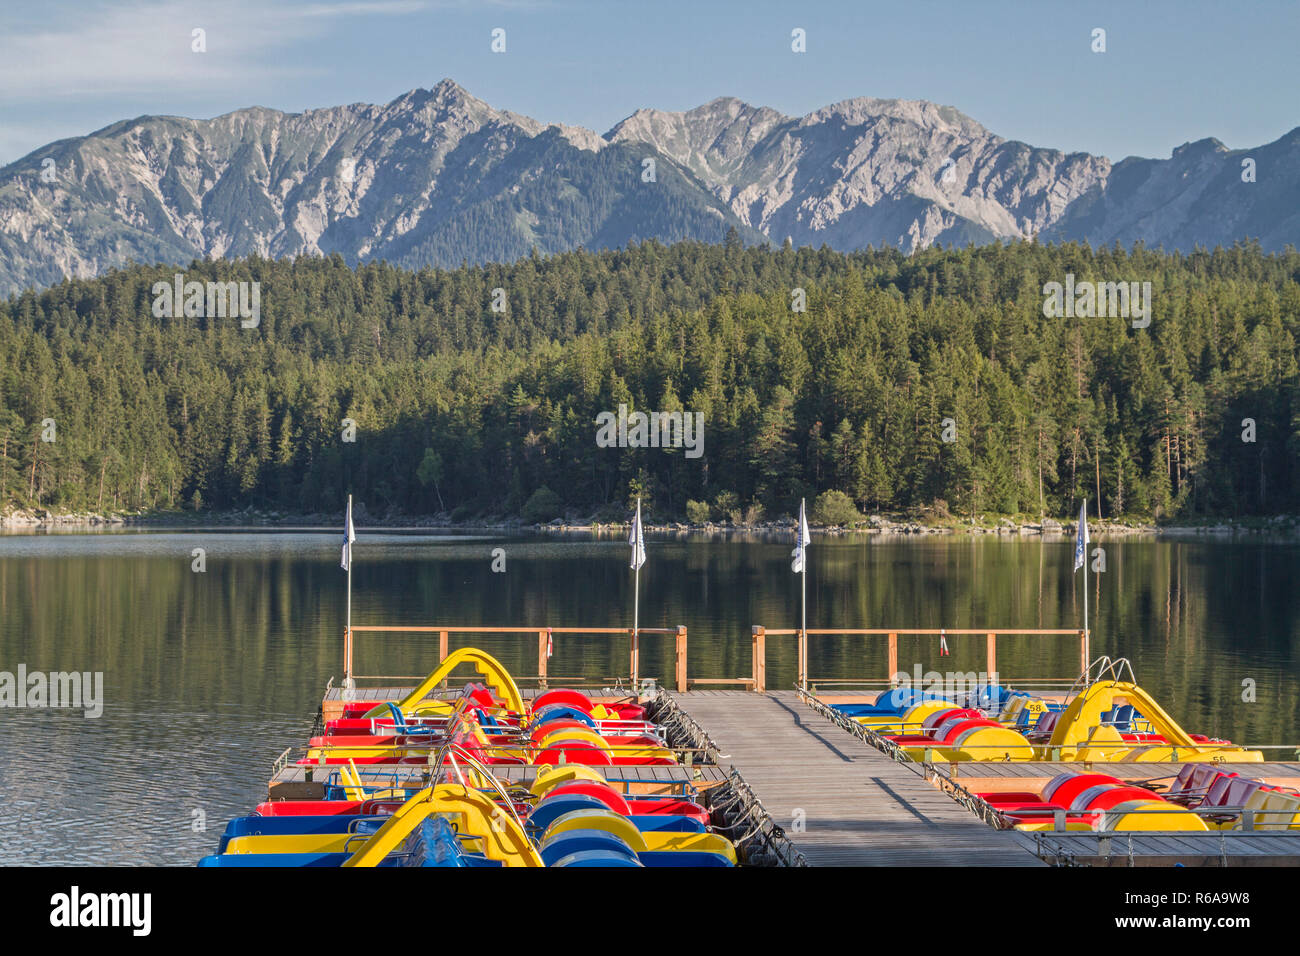 Colorful Pedal Boats Invite The Countless Tourists To A Sporty Pleasure Ride On The Eibsee Stock Photo